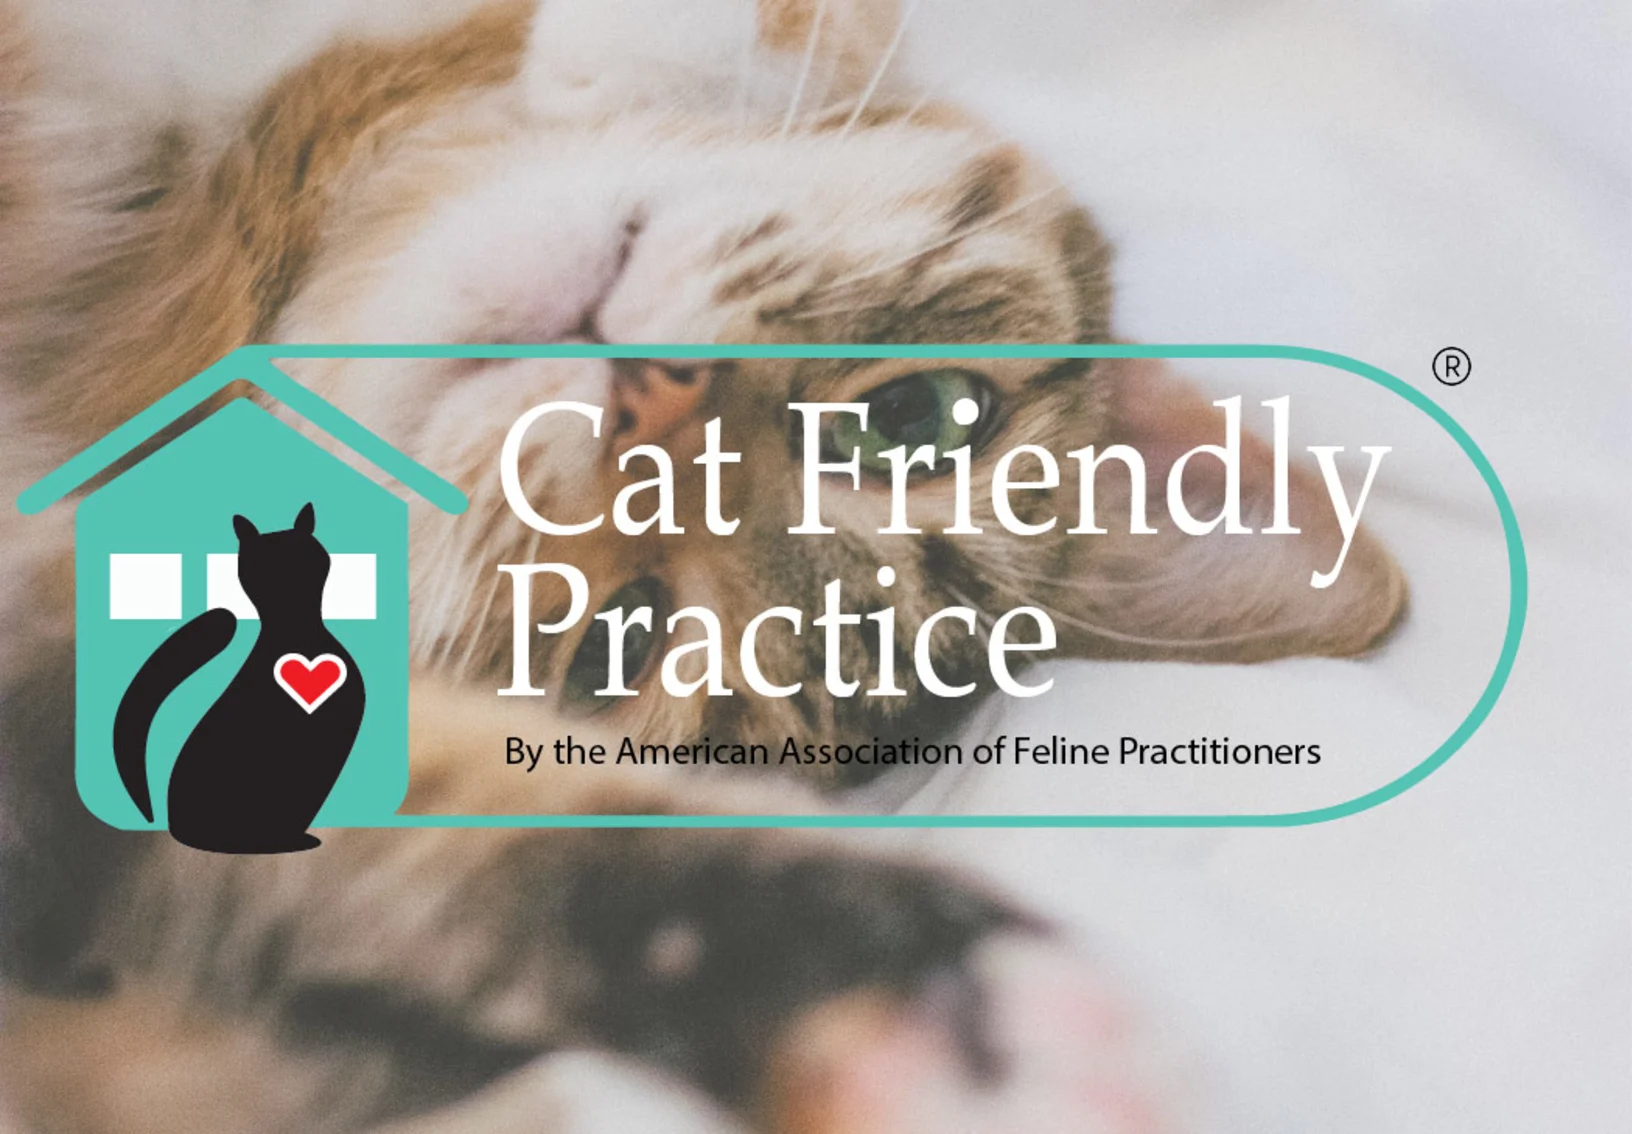 Cat Friendly Practice certified by American Association of Feline Practitioners